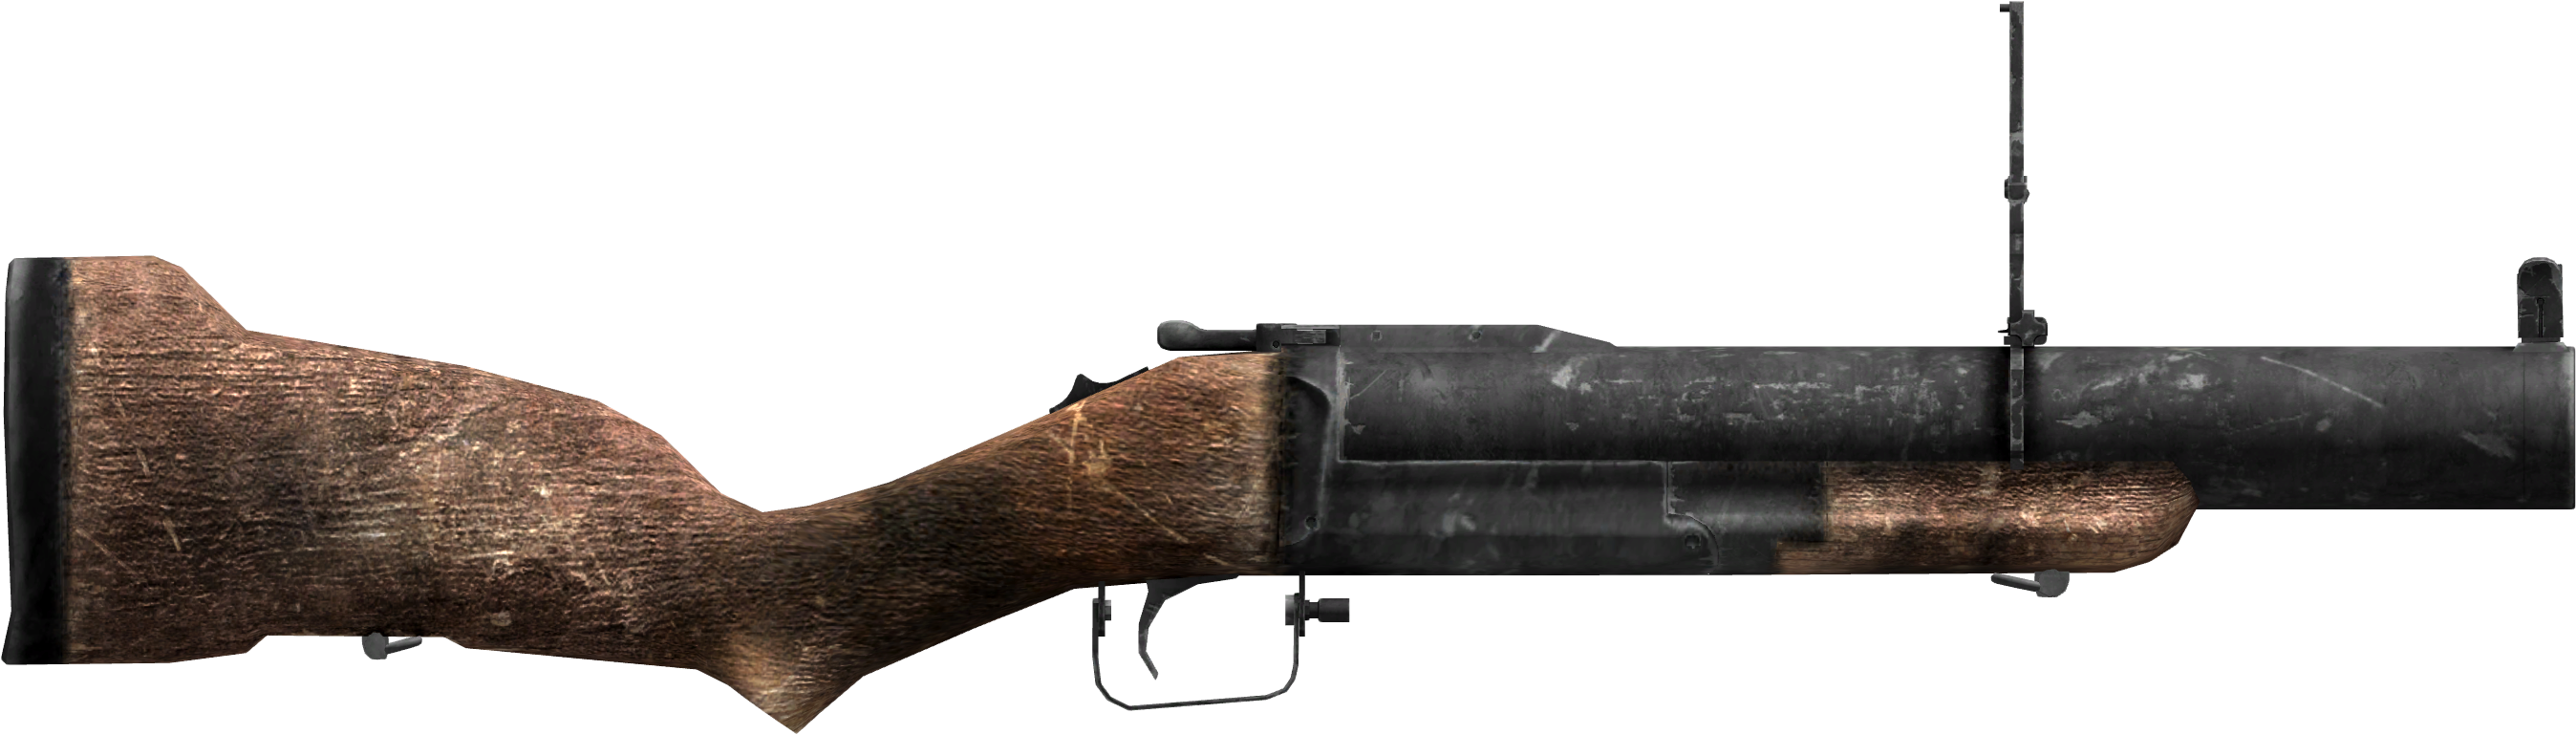 M79 Grenade Rifle (2900x1000), Png Download